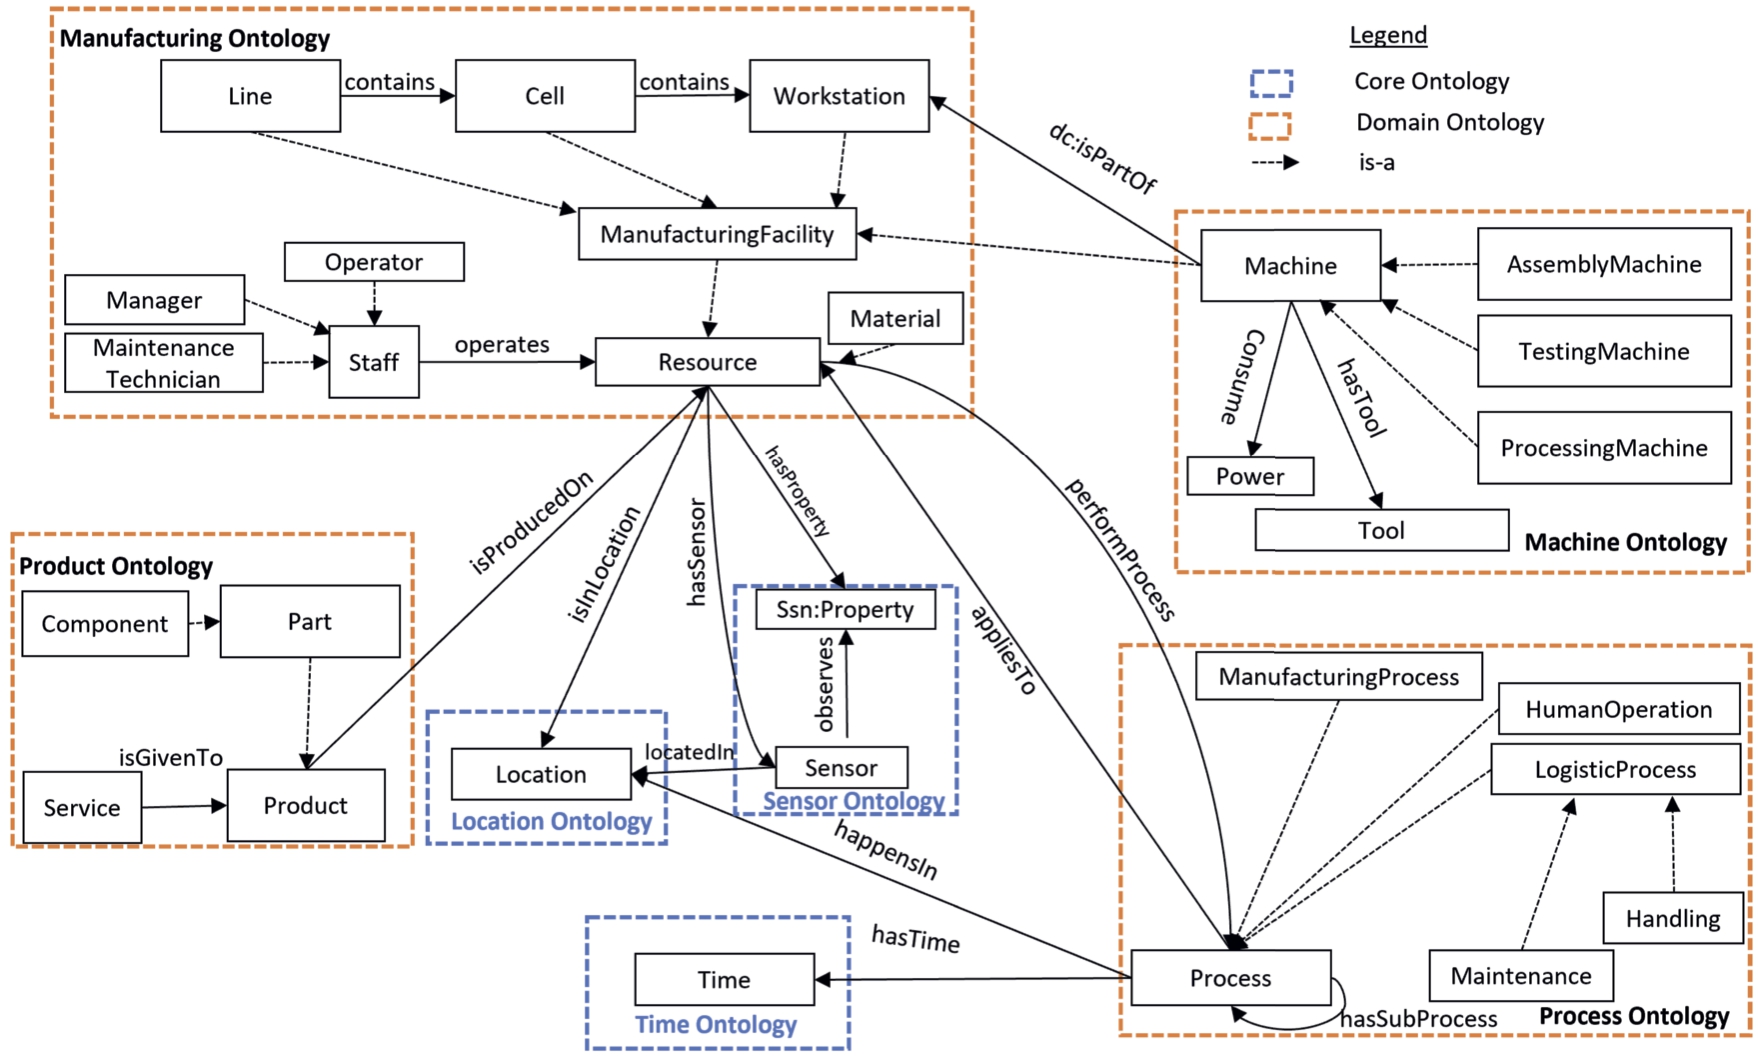 Figure illustrates some of the main classes, sub classes and relations of domain and core ontologies in RGOM ontology.